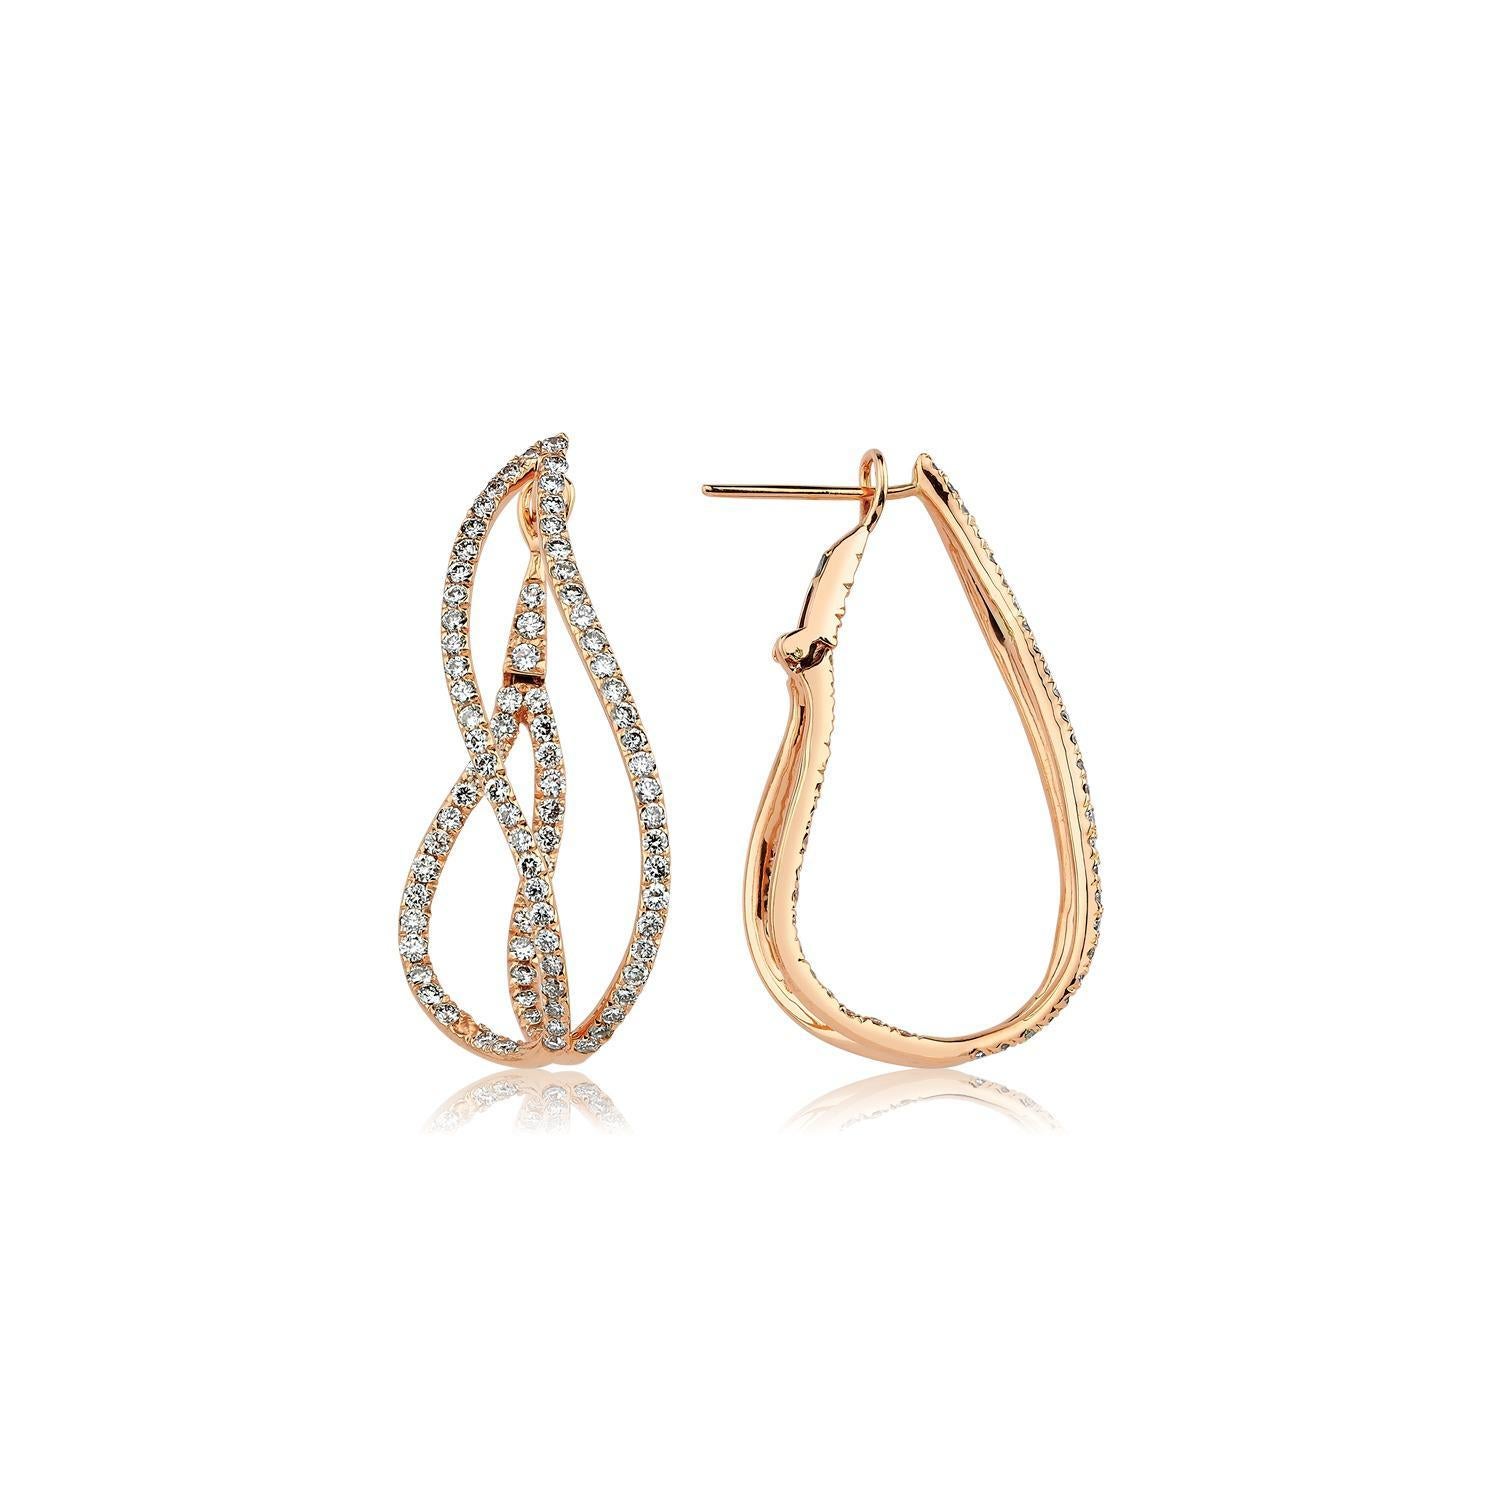 New Forms, by Emre Osmanlar, is a sophisticated exploration of geometry through jewellery.
Classic forms give way to new ones as curves, links and pivots emerge adding unusual dimensions and fluidity to create fascinating new shapes.
Like much of